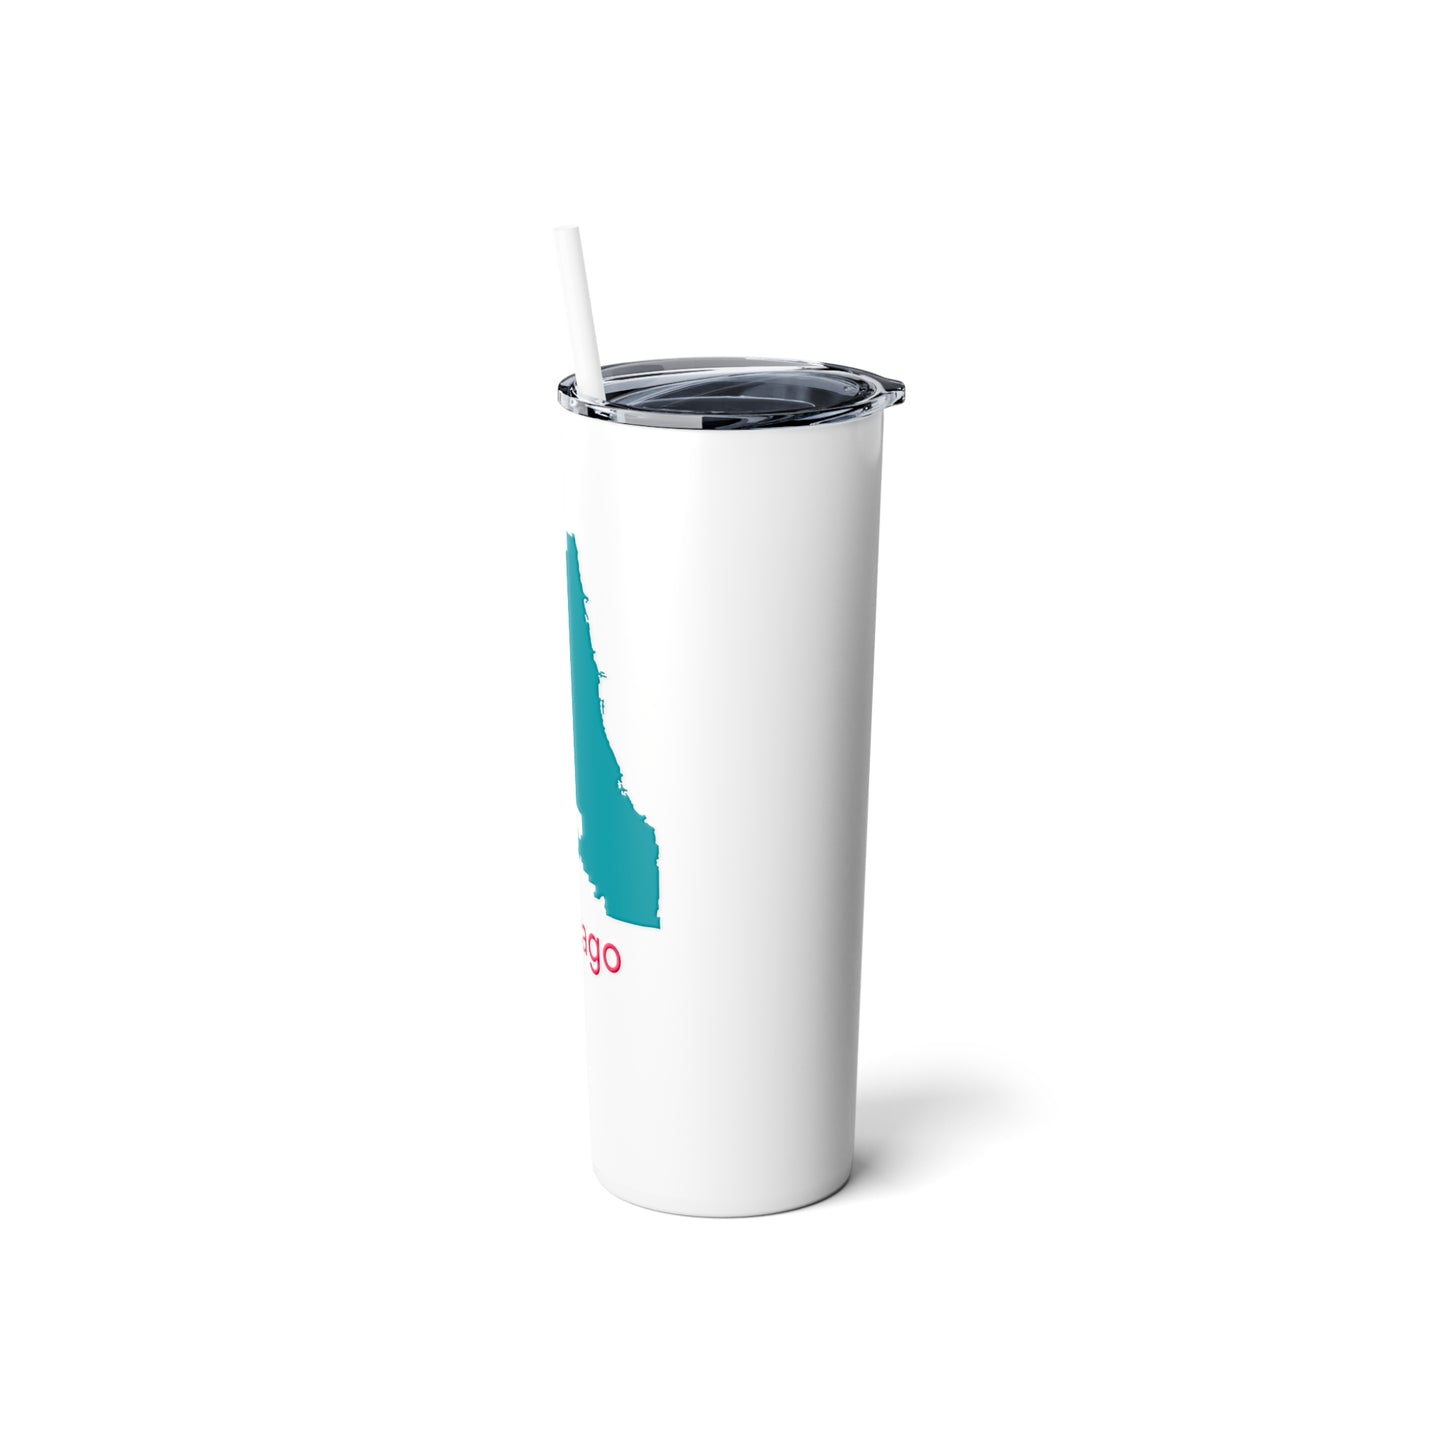 Chicago in Teal and Hot Pink Skinny Steel Tumbler with Straw, 20oz